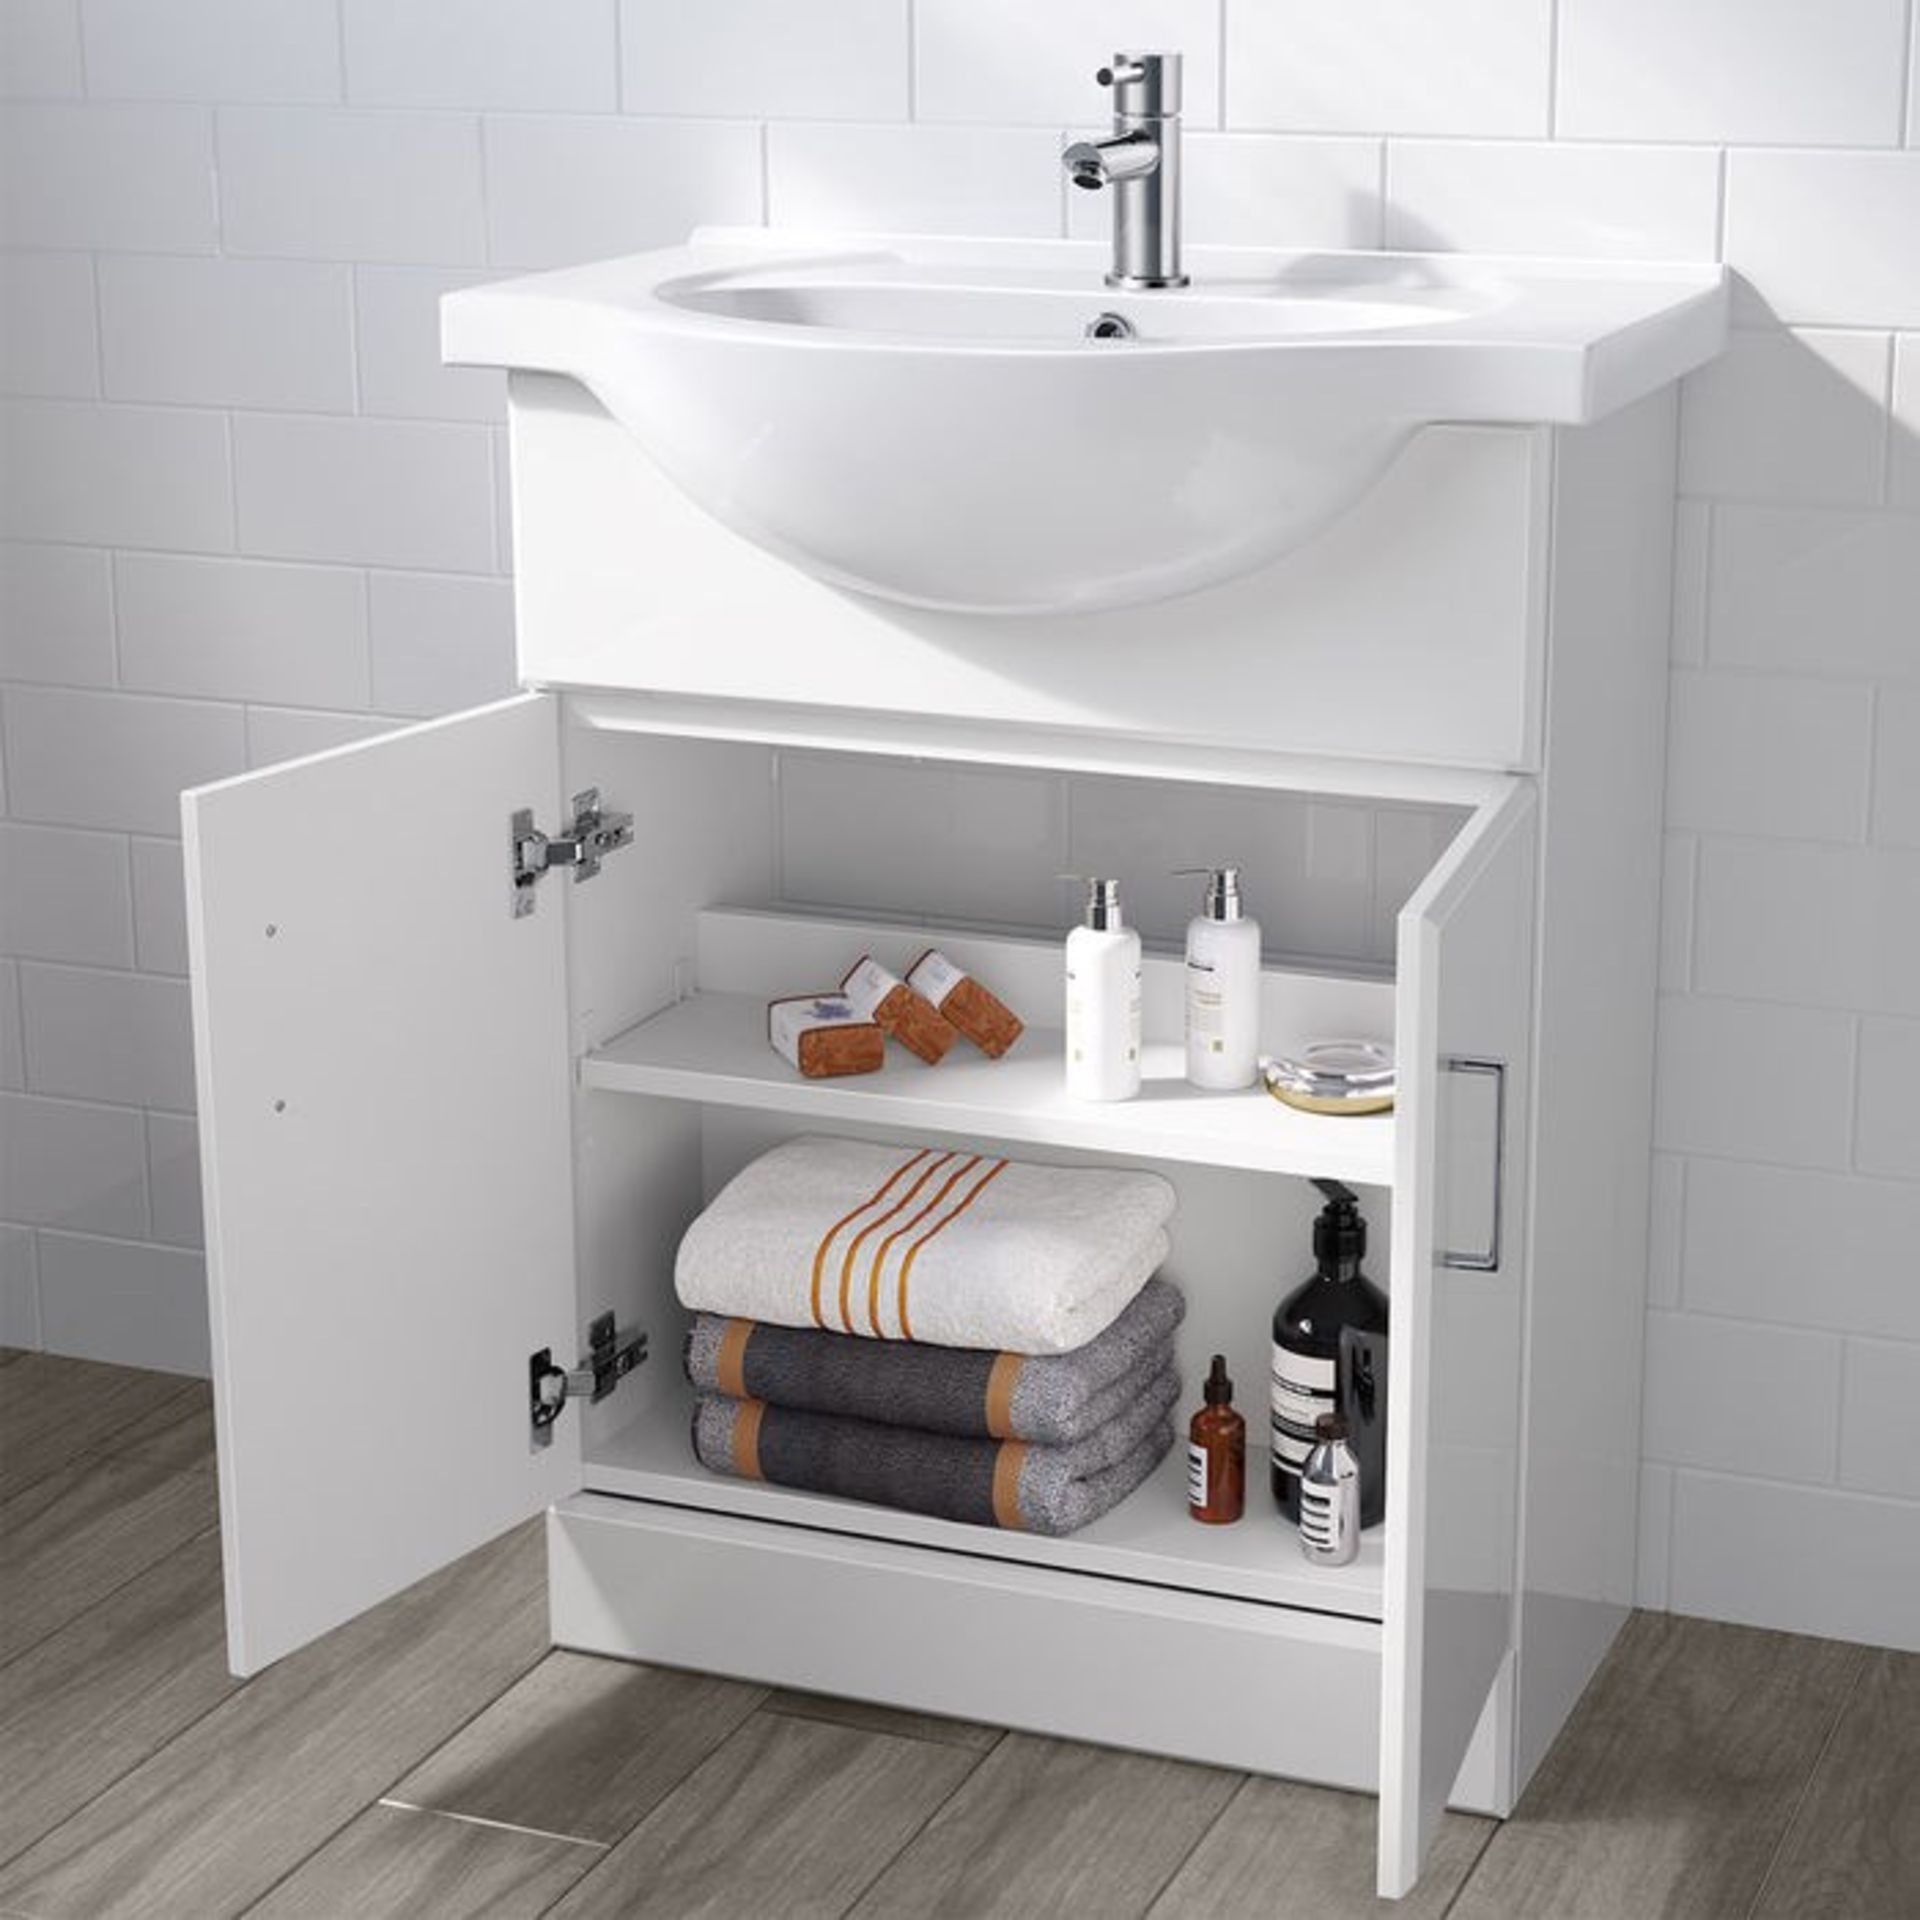 (TT150) 550mm Quartz Gloss White Built In Basin Cabinet. RRP £349.99. Comes complete with basi... - Image 2 of 4